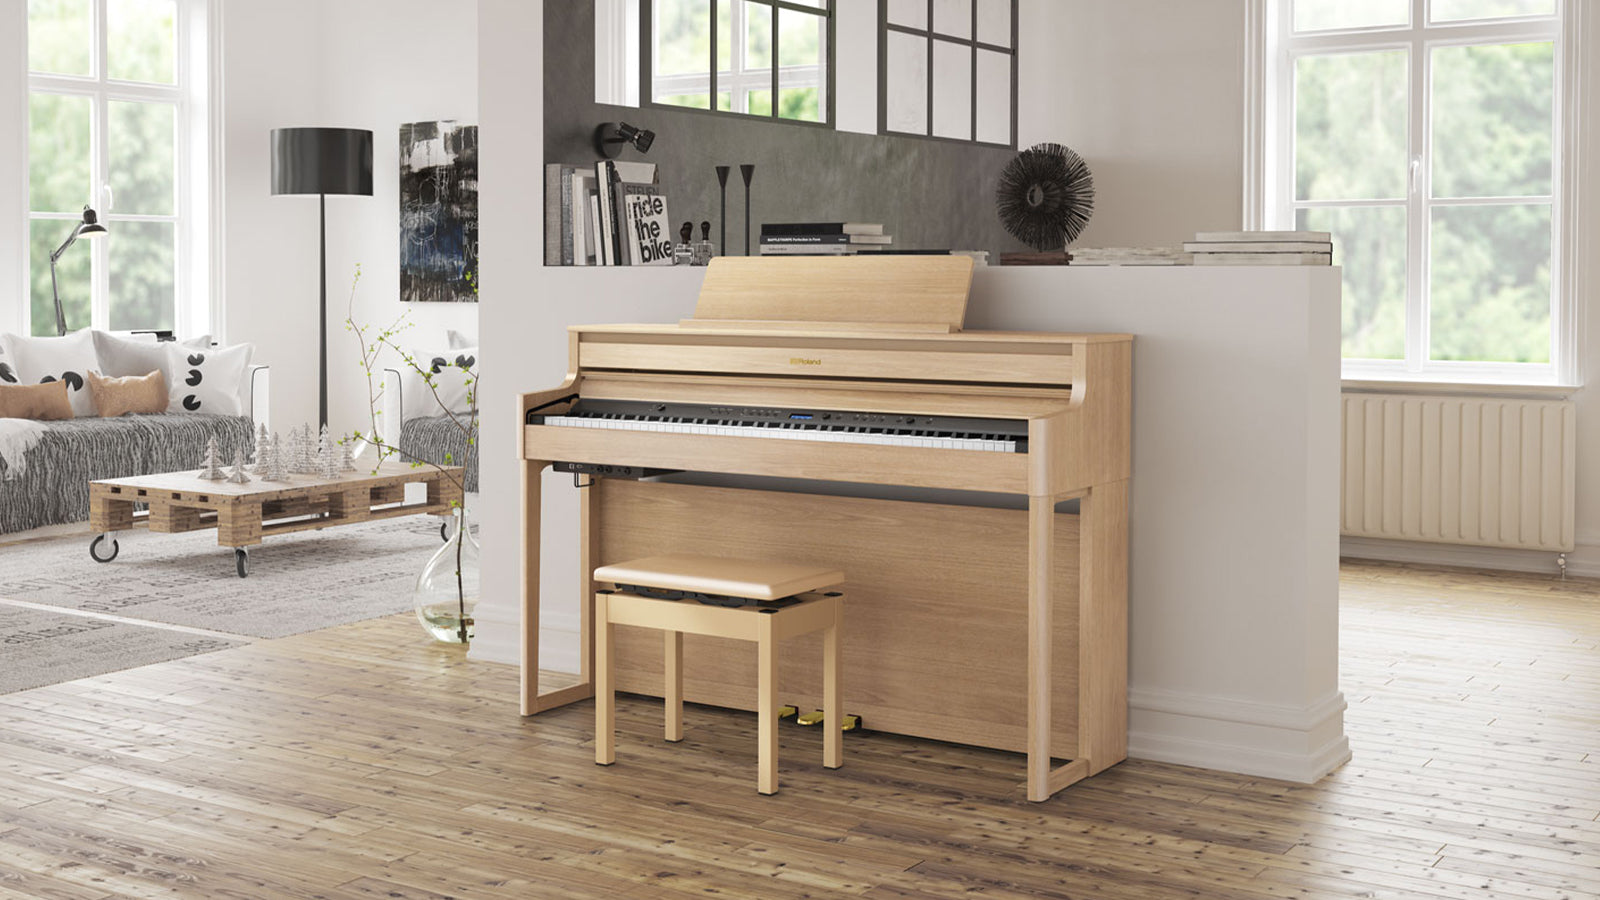 A Roland HP702 digital piano in a stylish living space